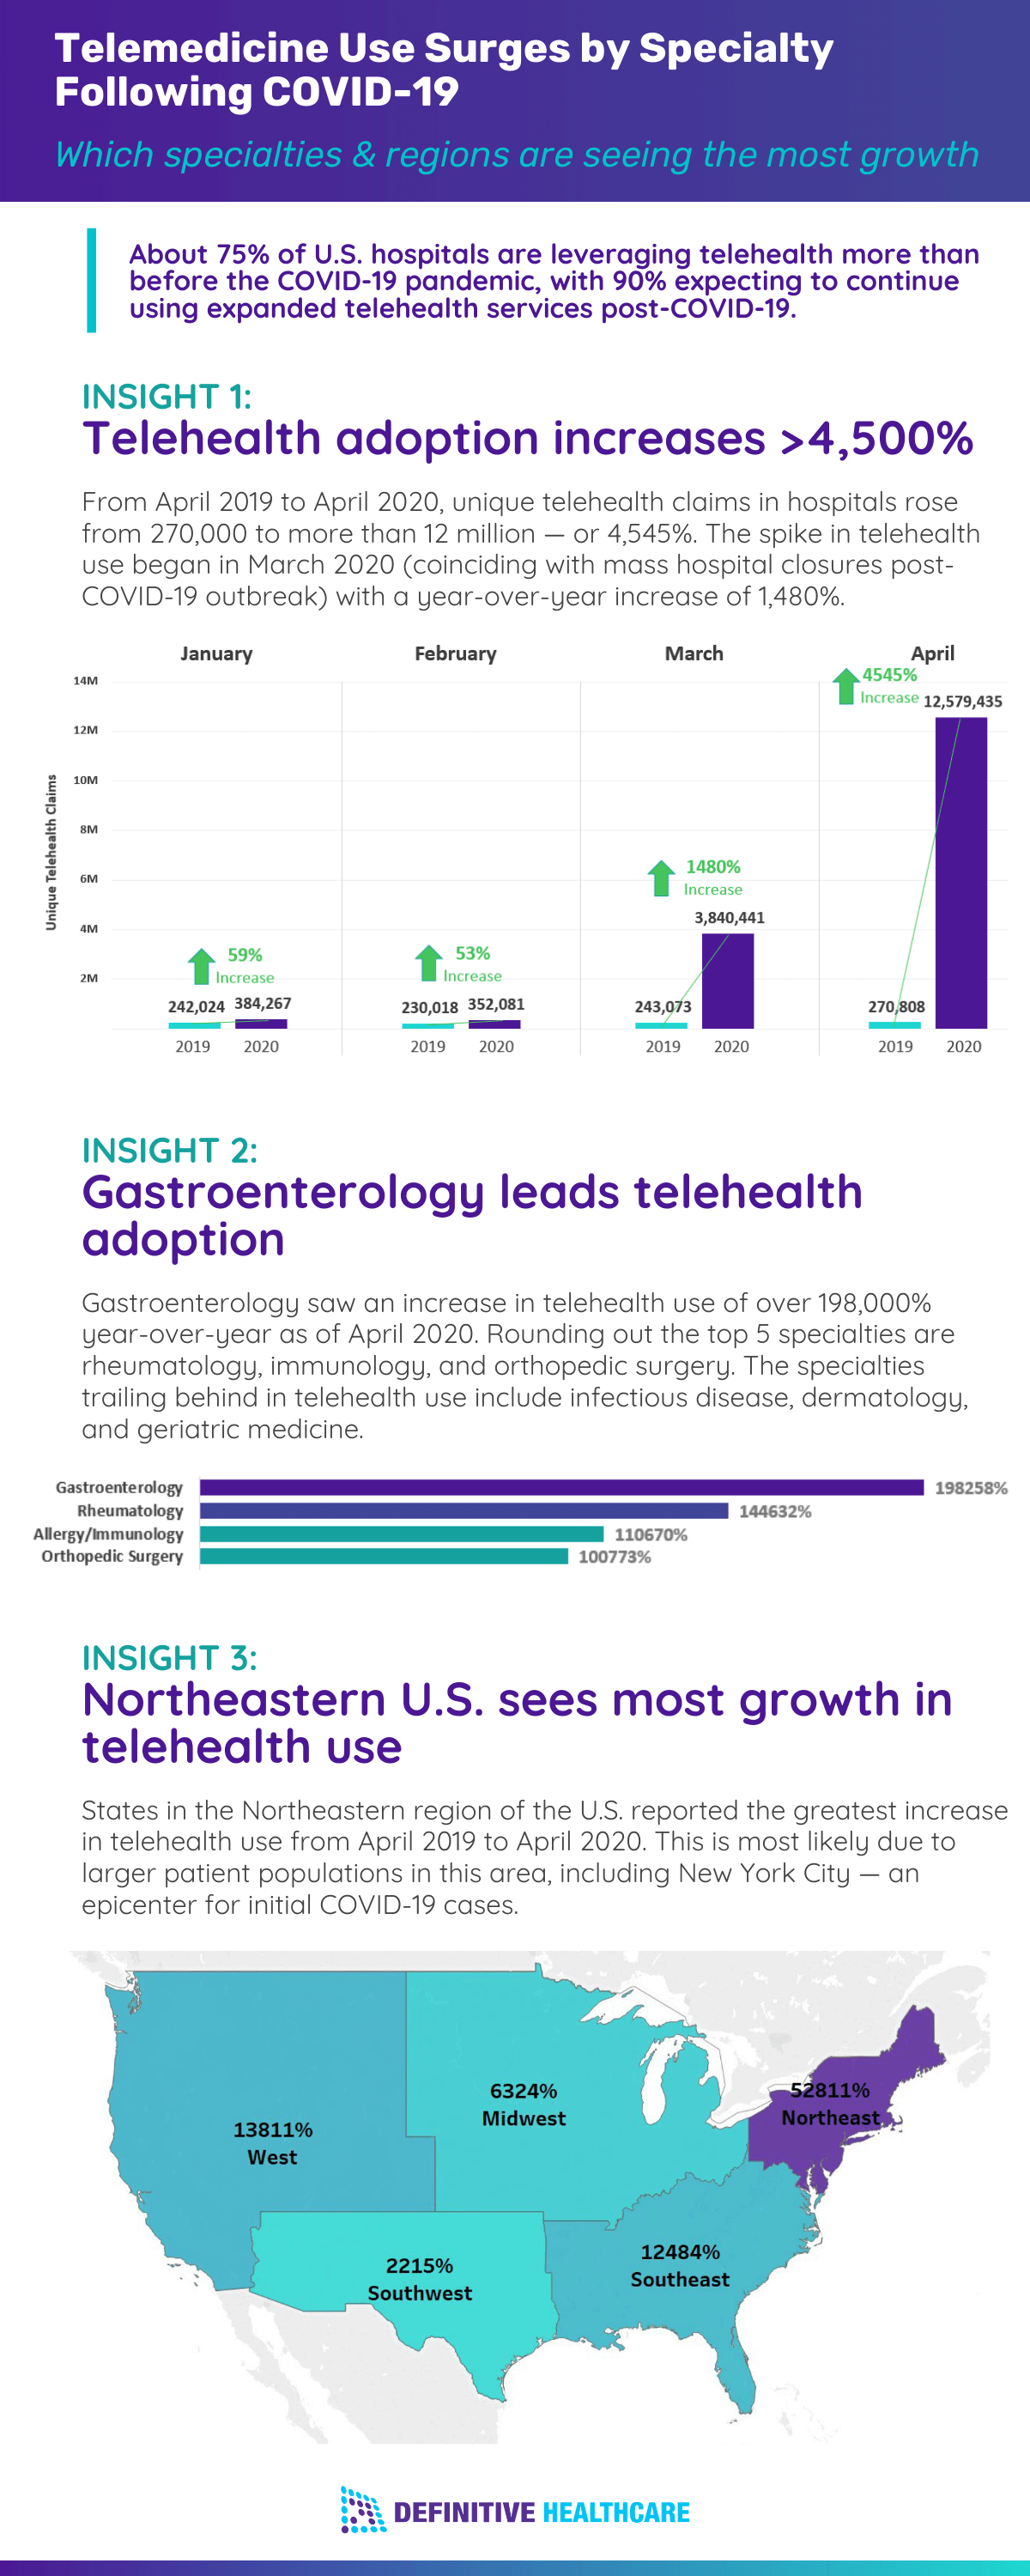 An infographic with three visuals explaining where there is greatest growth in telehealth use